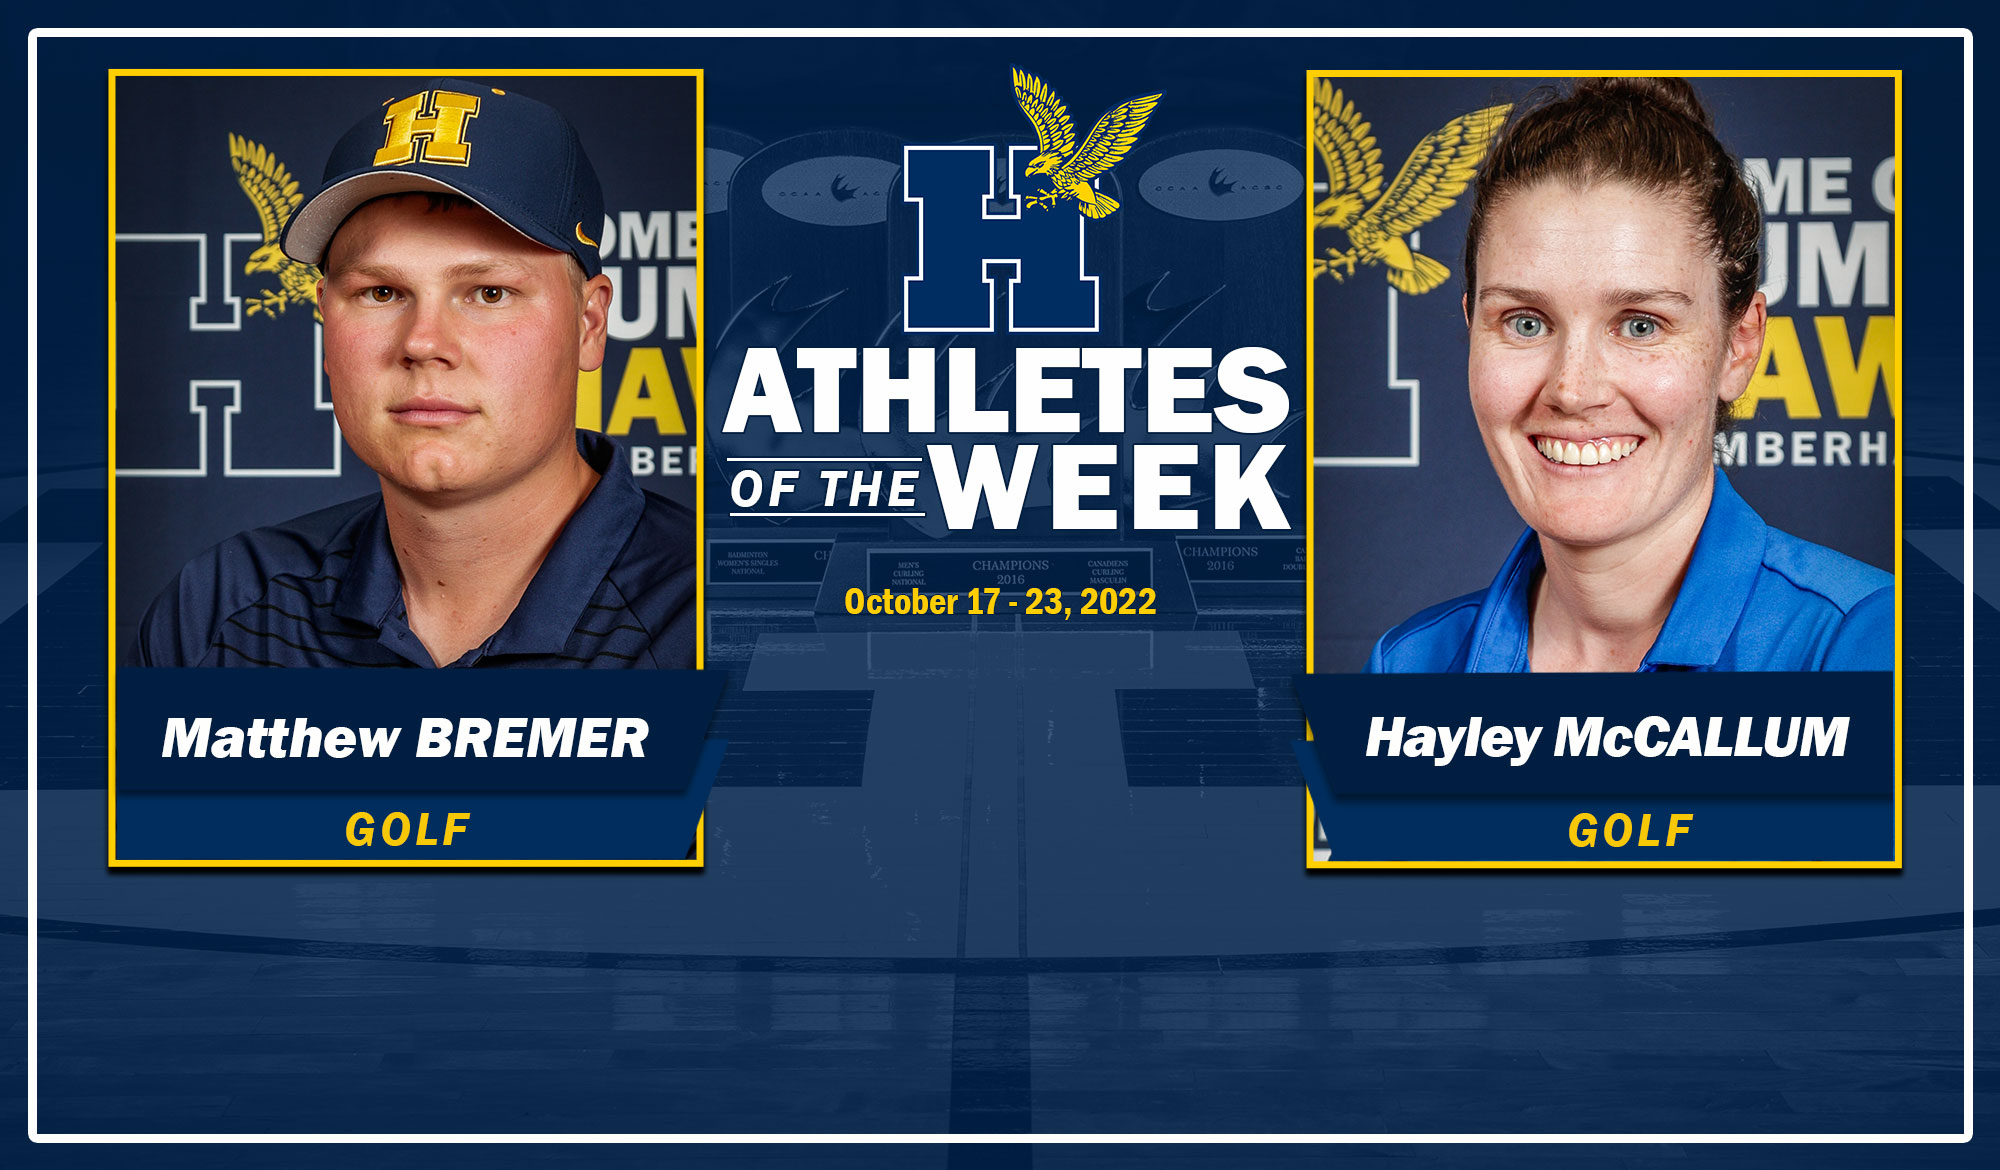 Bremer, McCallum Earn Humber Student-Athlete of the Week Honours